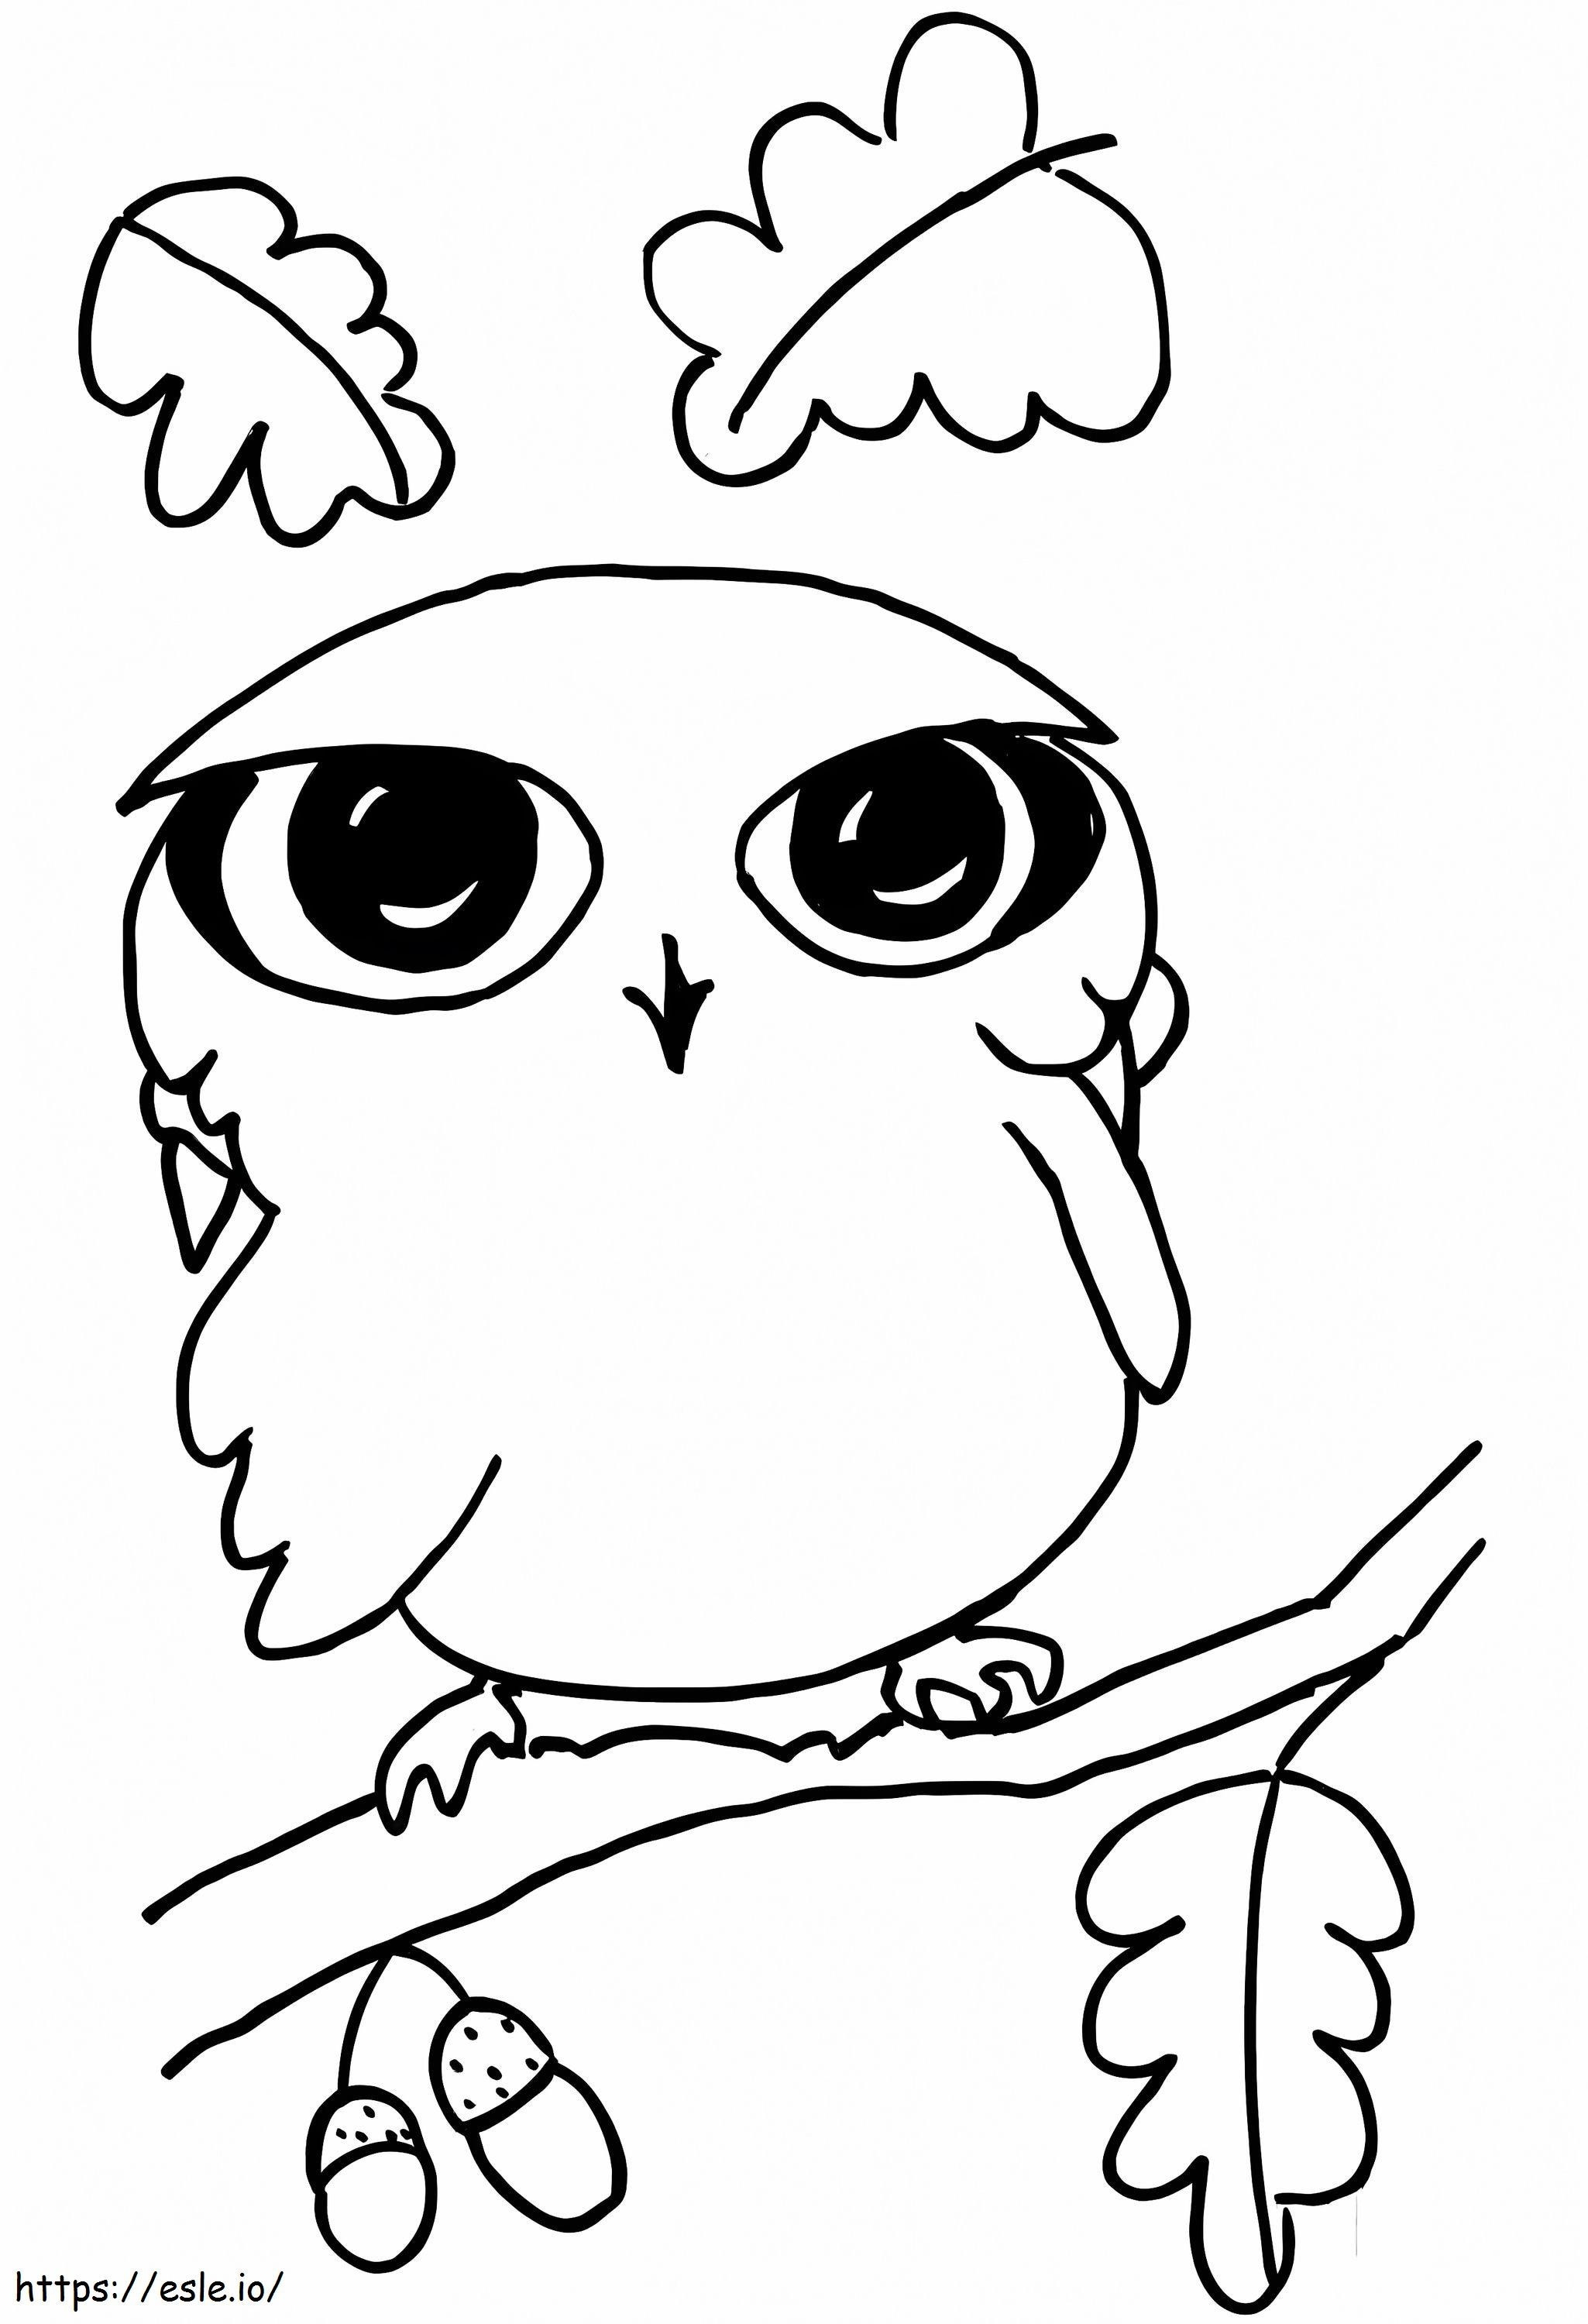 Little Owl coloring page